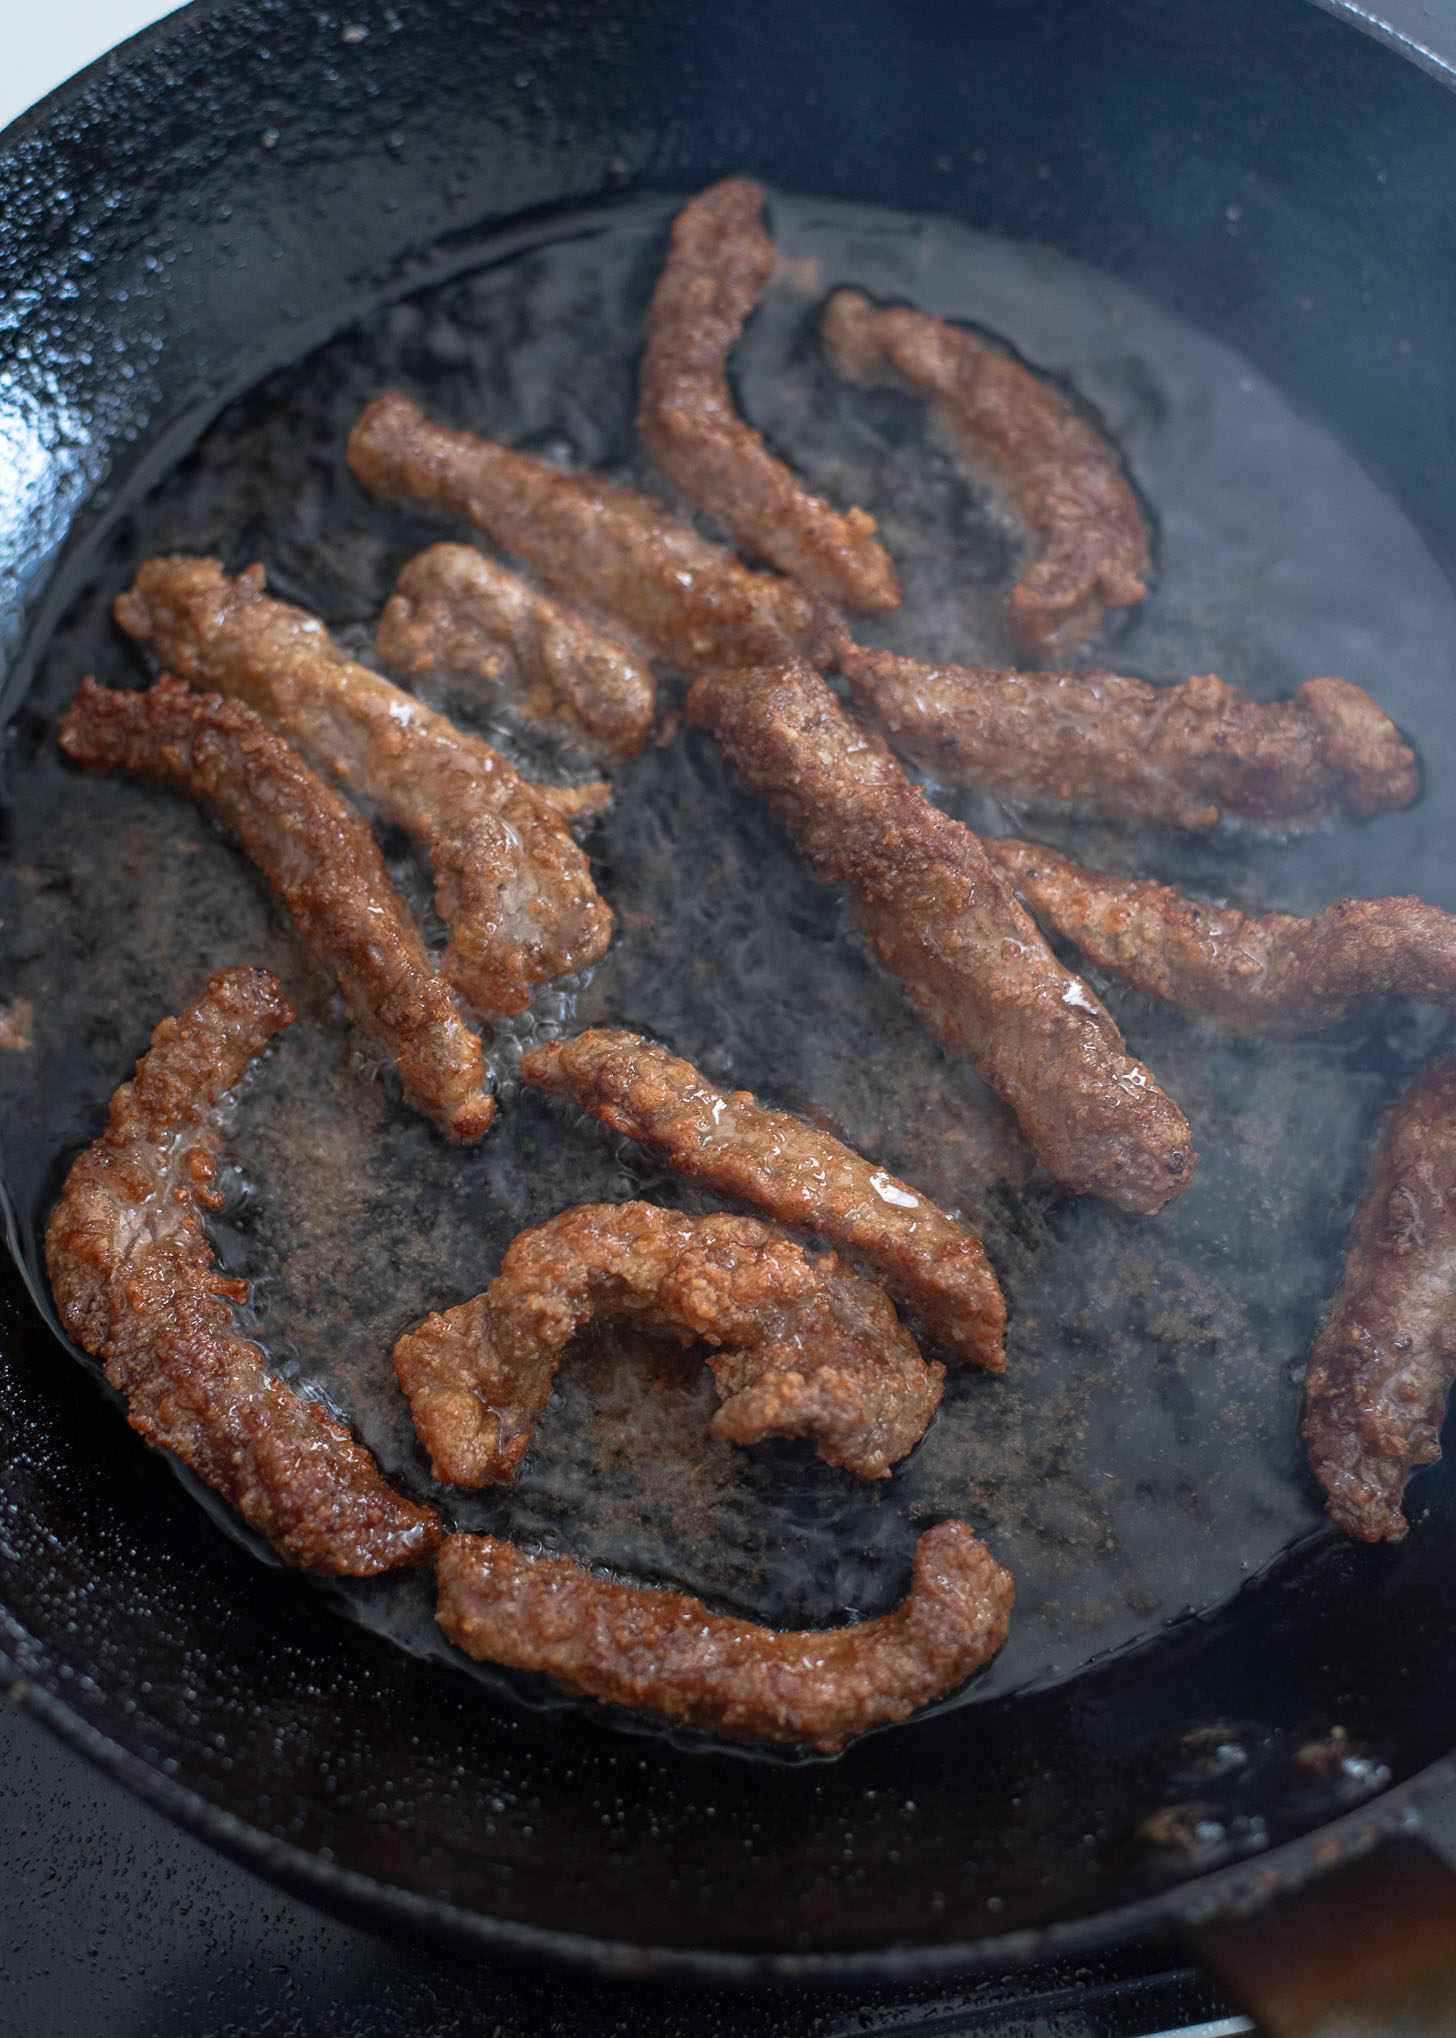 Beef strips are deep fried again for the second time to make crispy beef.